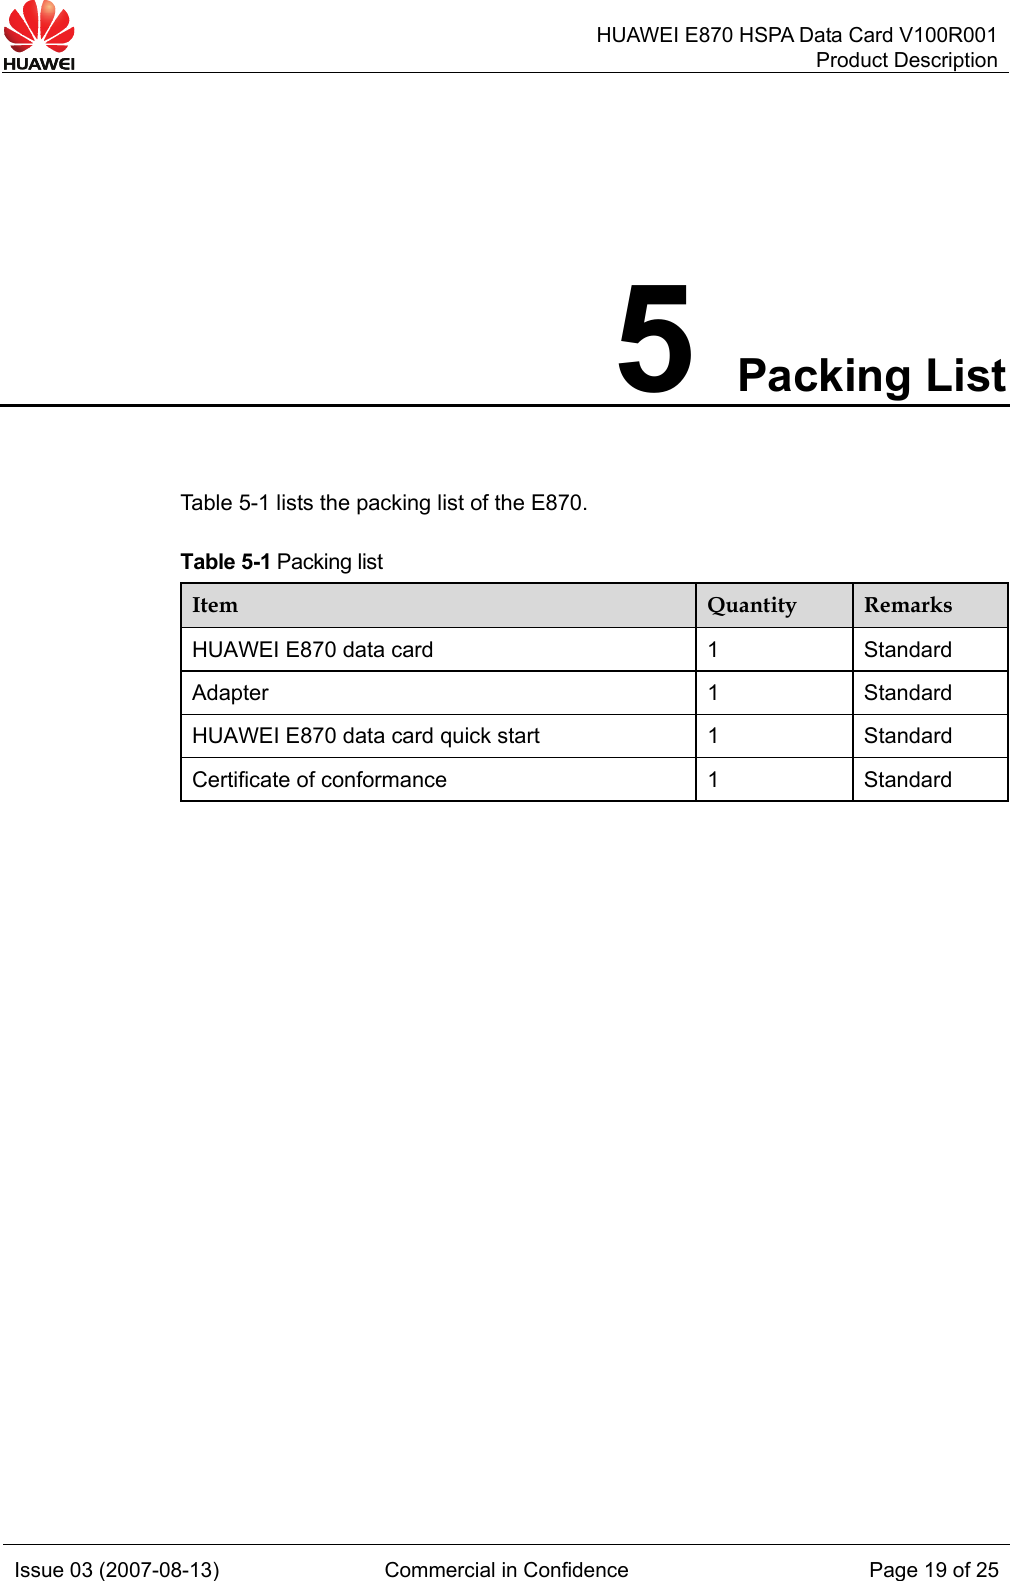   HUAWEI E870 HSPA Data Card V100R001Product Description Issue 03 (2007-08-13)  Commercial in Confidence  Page 19 of 25 5 Packing List Table 5-1 lists the packing list of the E870. Table 5-1 Packing list Item  Quantity  Remarks HUAWEI E870 data card  1  Standard Adapter 1 Standard HUAWEI E870 data card quick start  1  Standard Certificate of conformance 1 Standard  